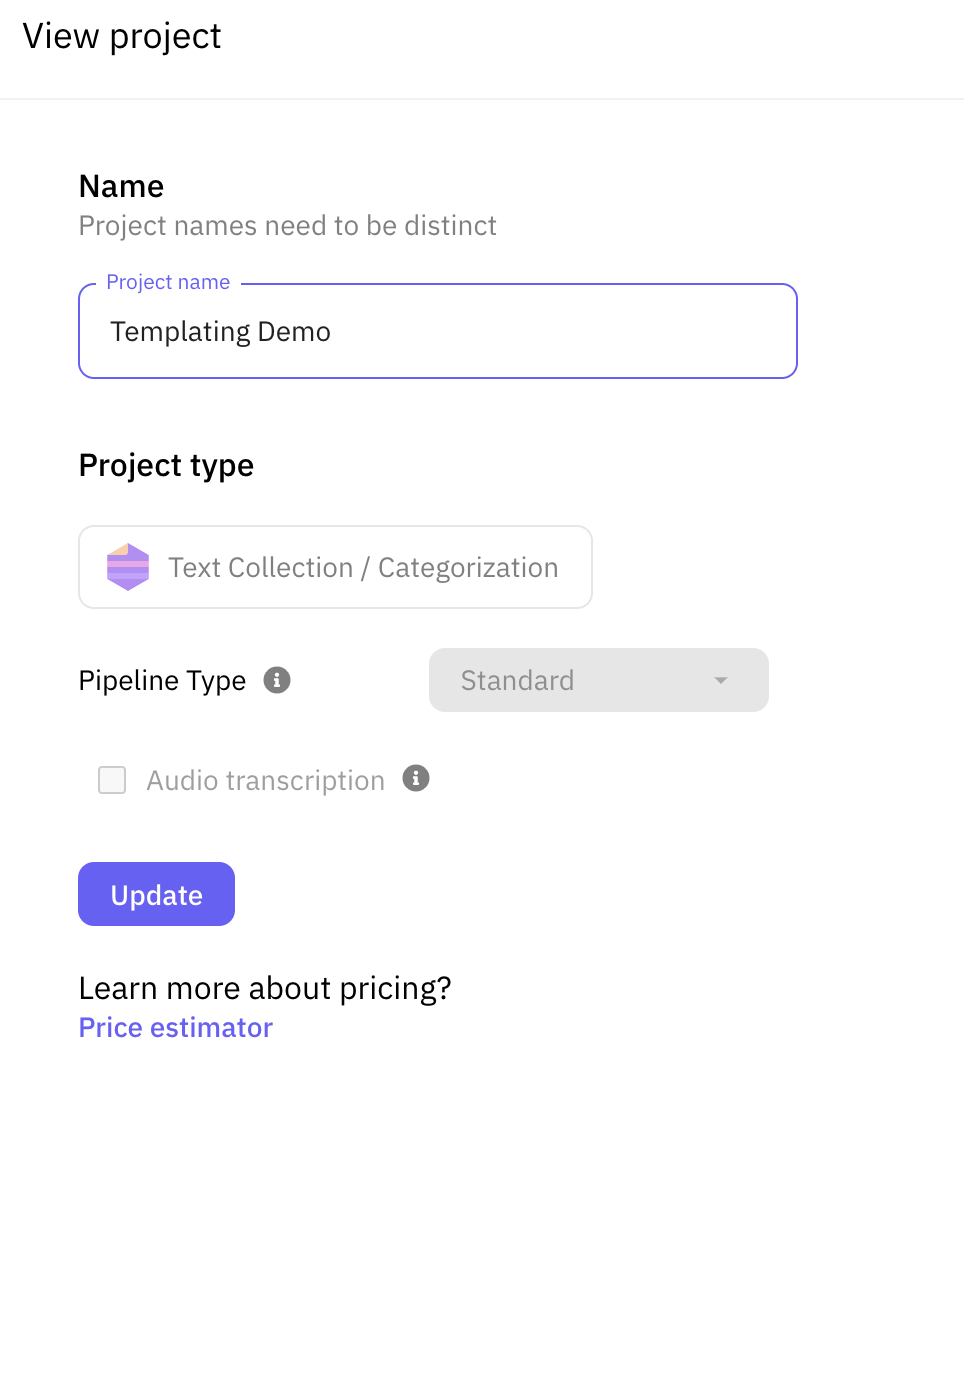 You can select the pipeline type and whether it is related to audio transcription or not in the project creation page.